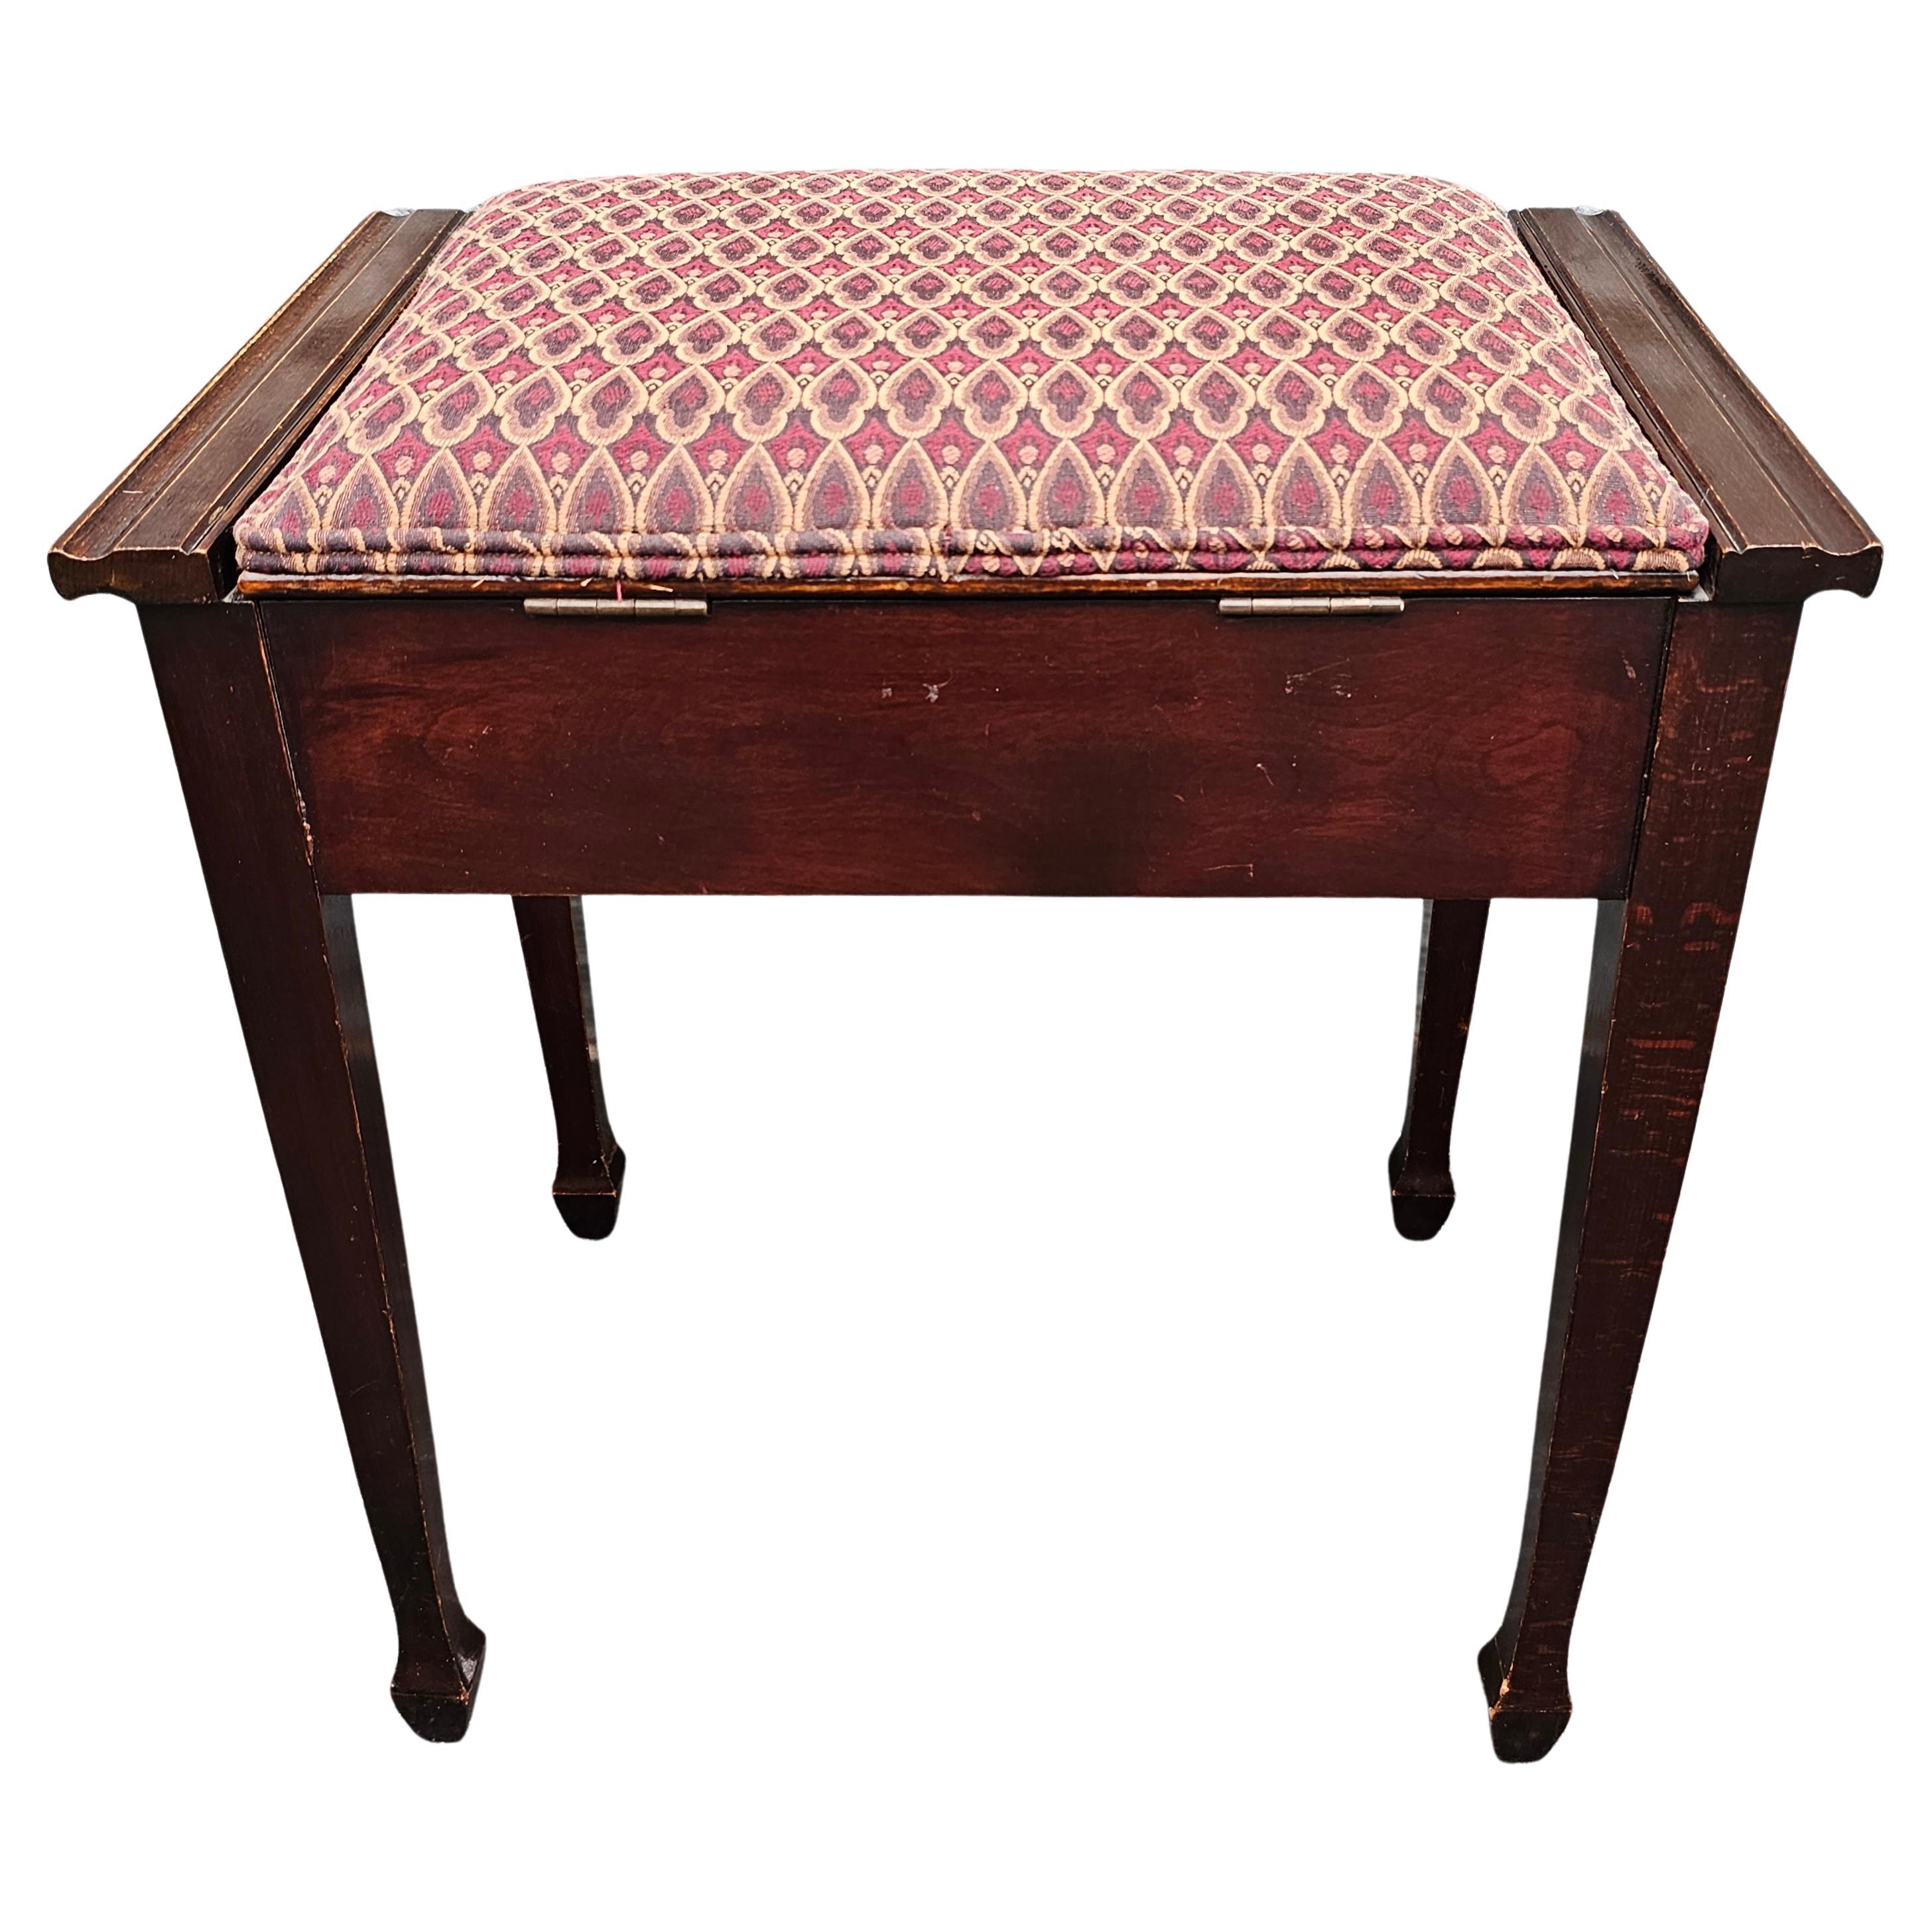 Metalwork George III Style Mahogany and Upholstered Hinged-Top Stool / Piano Bench